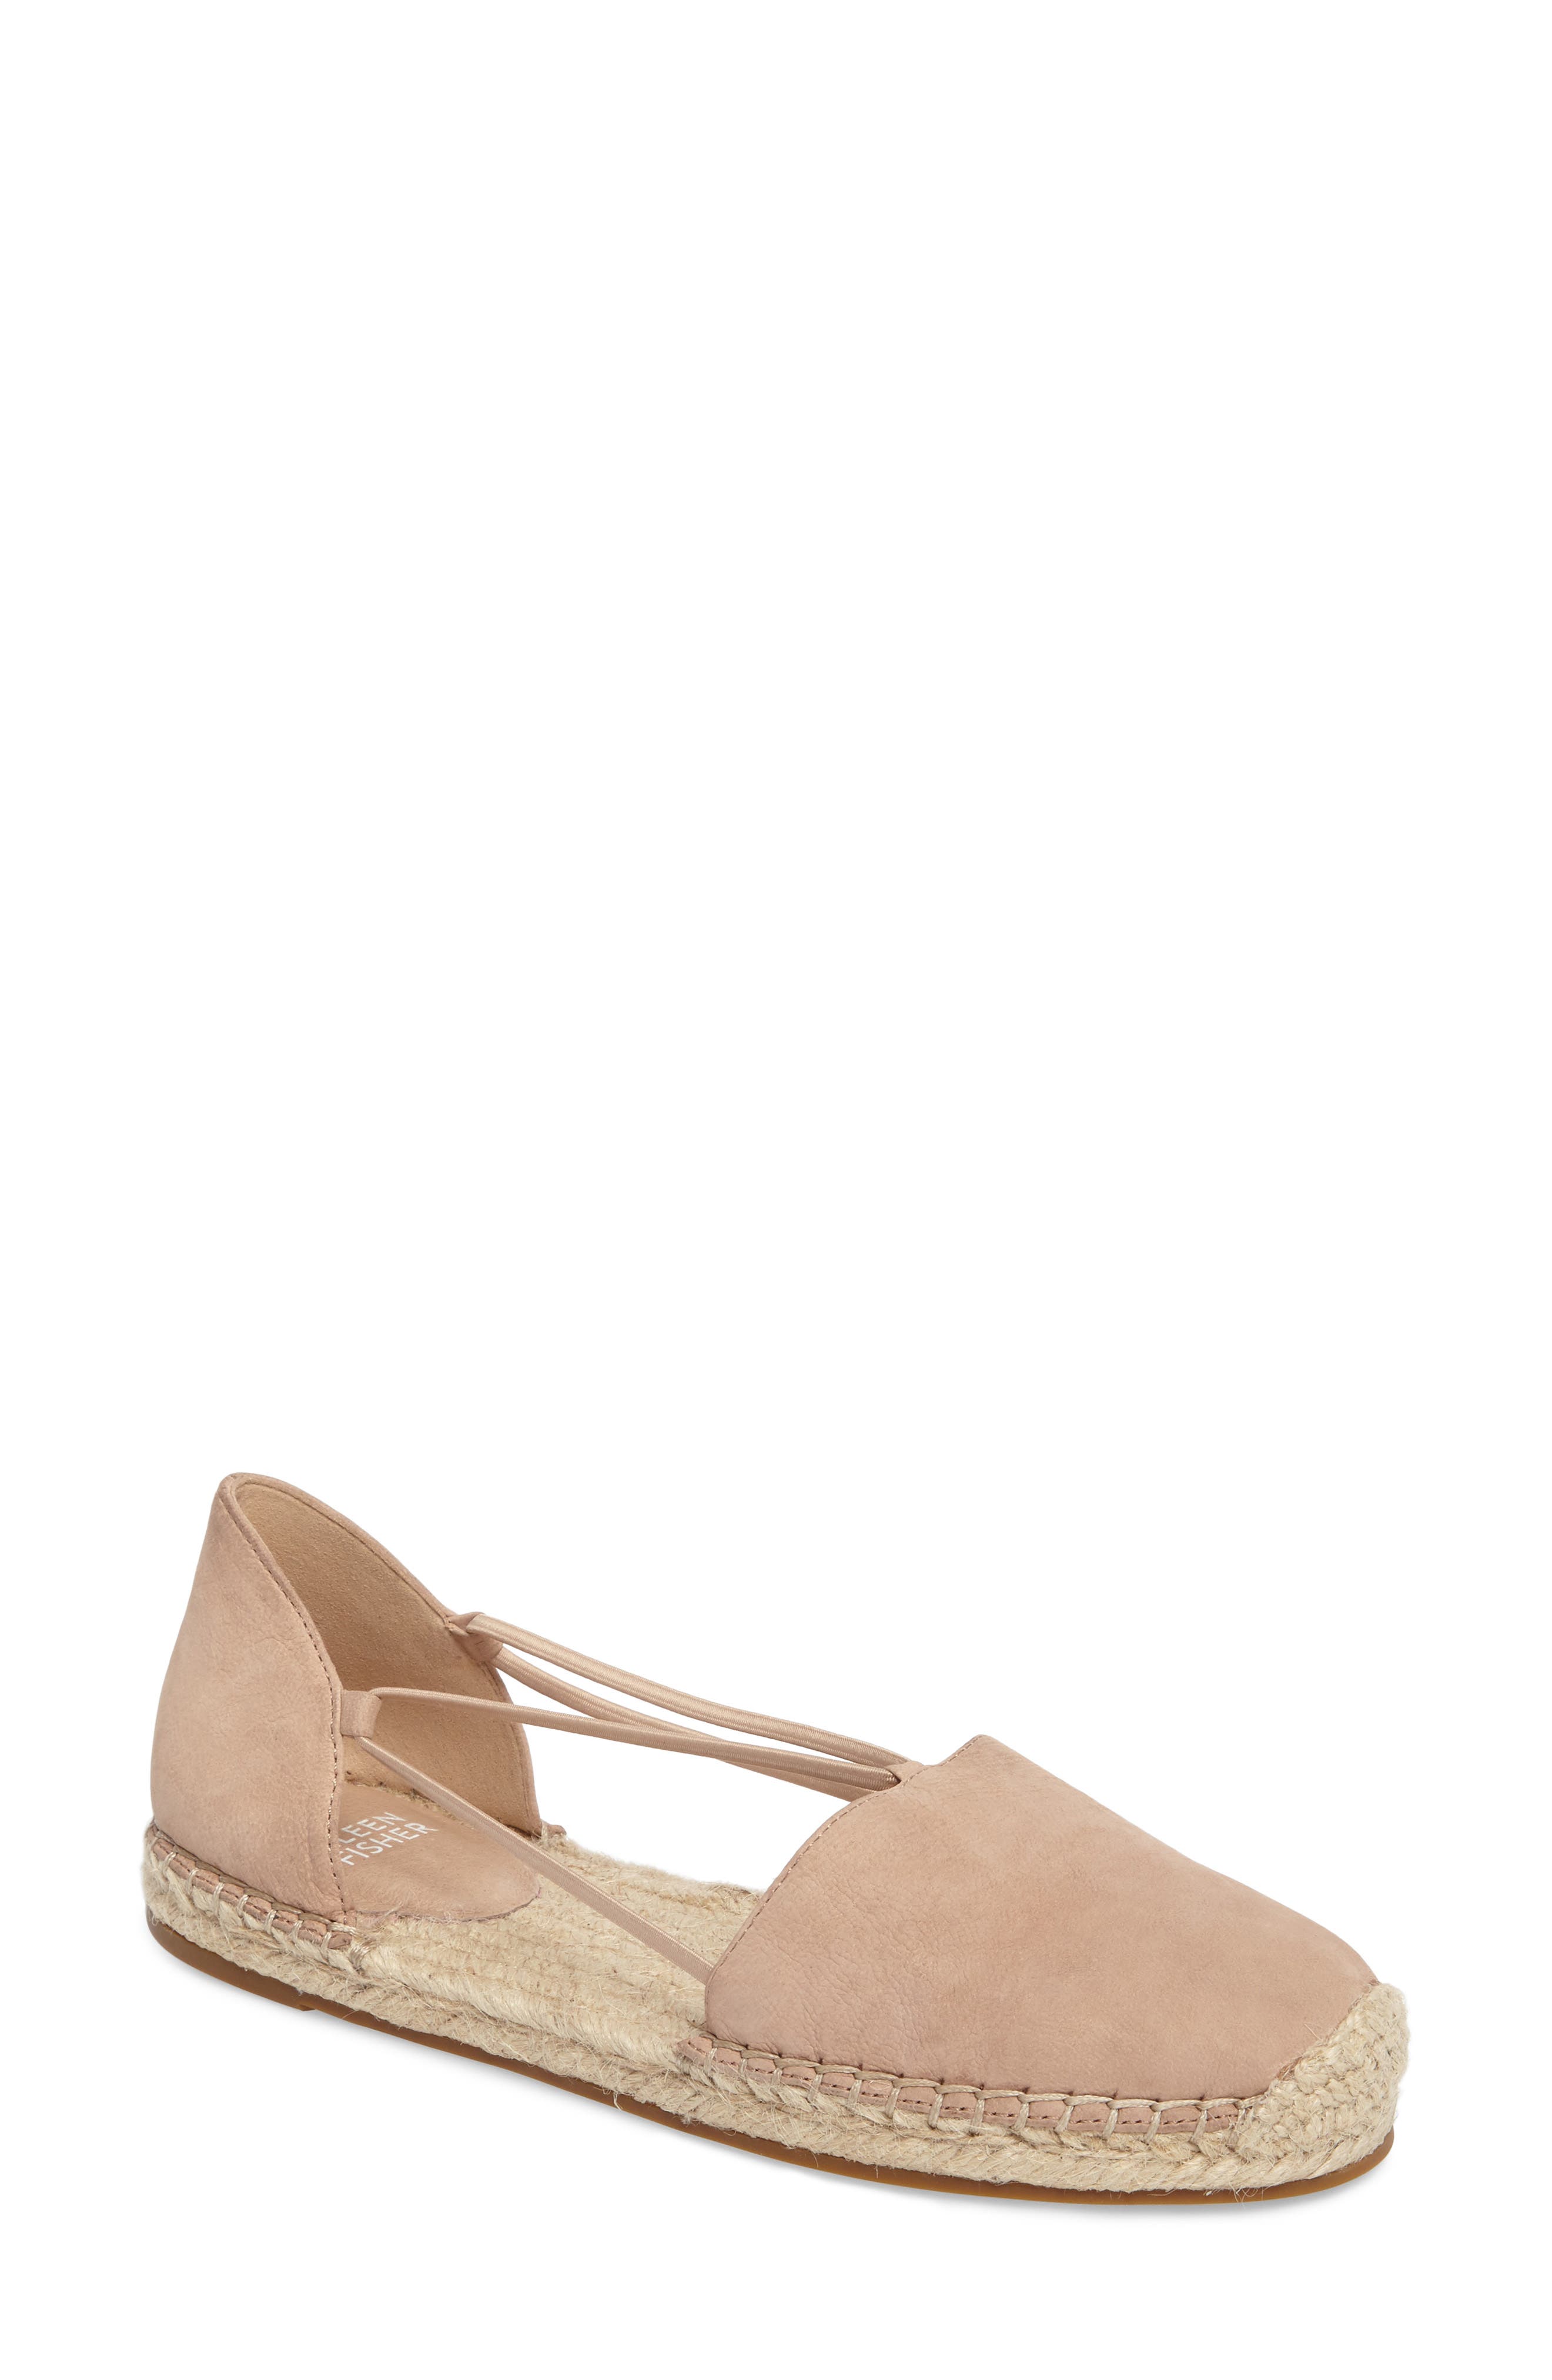 Lace Strappy Espadrille Flats 